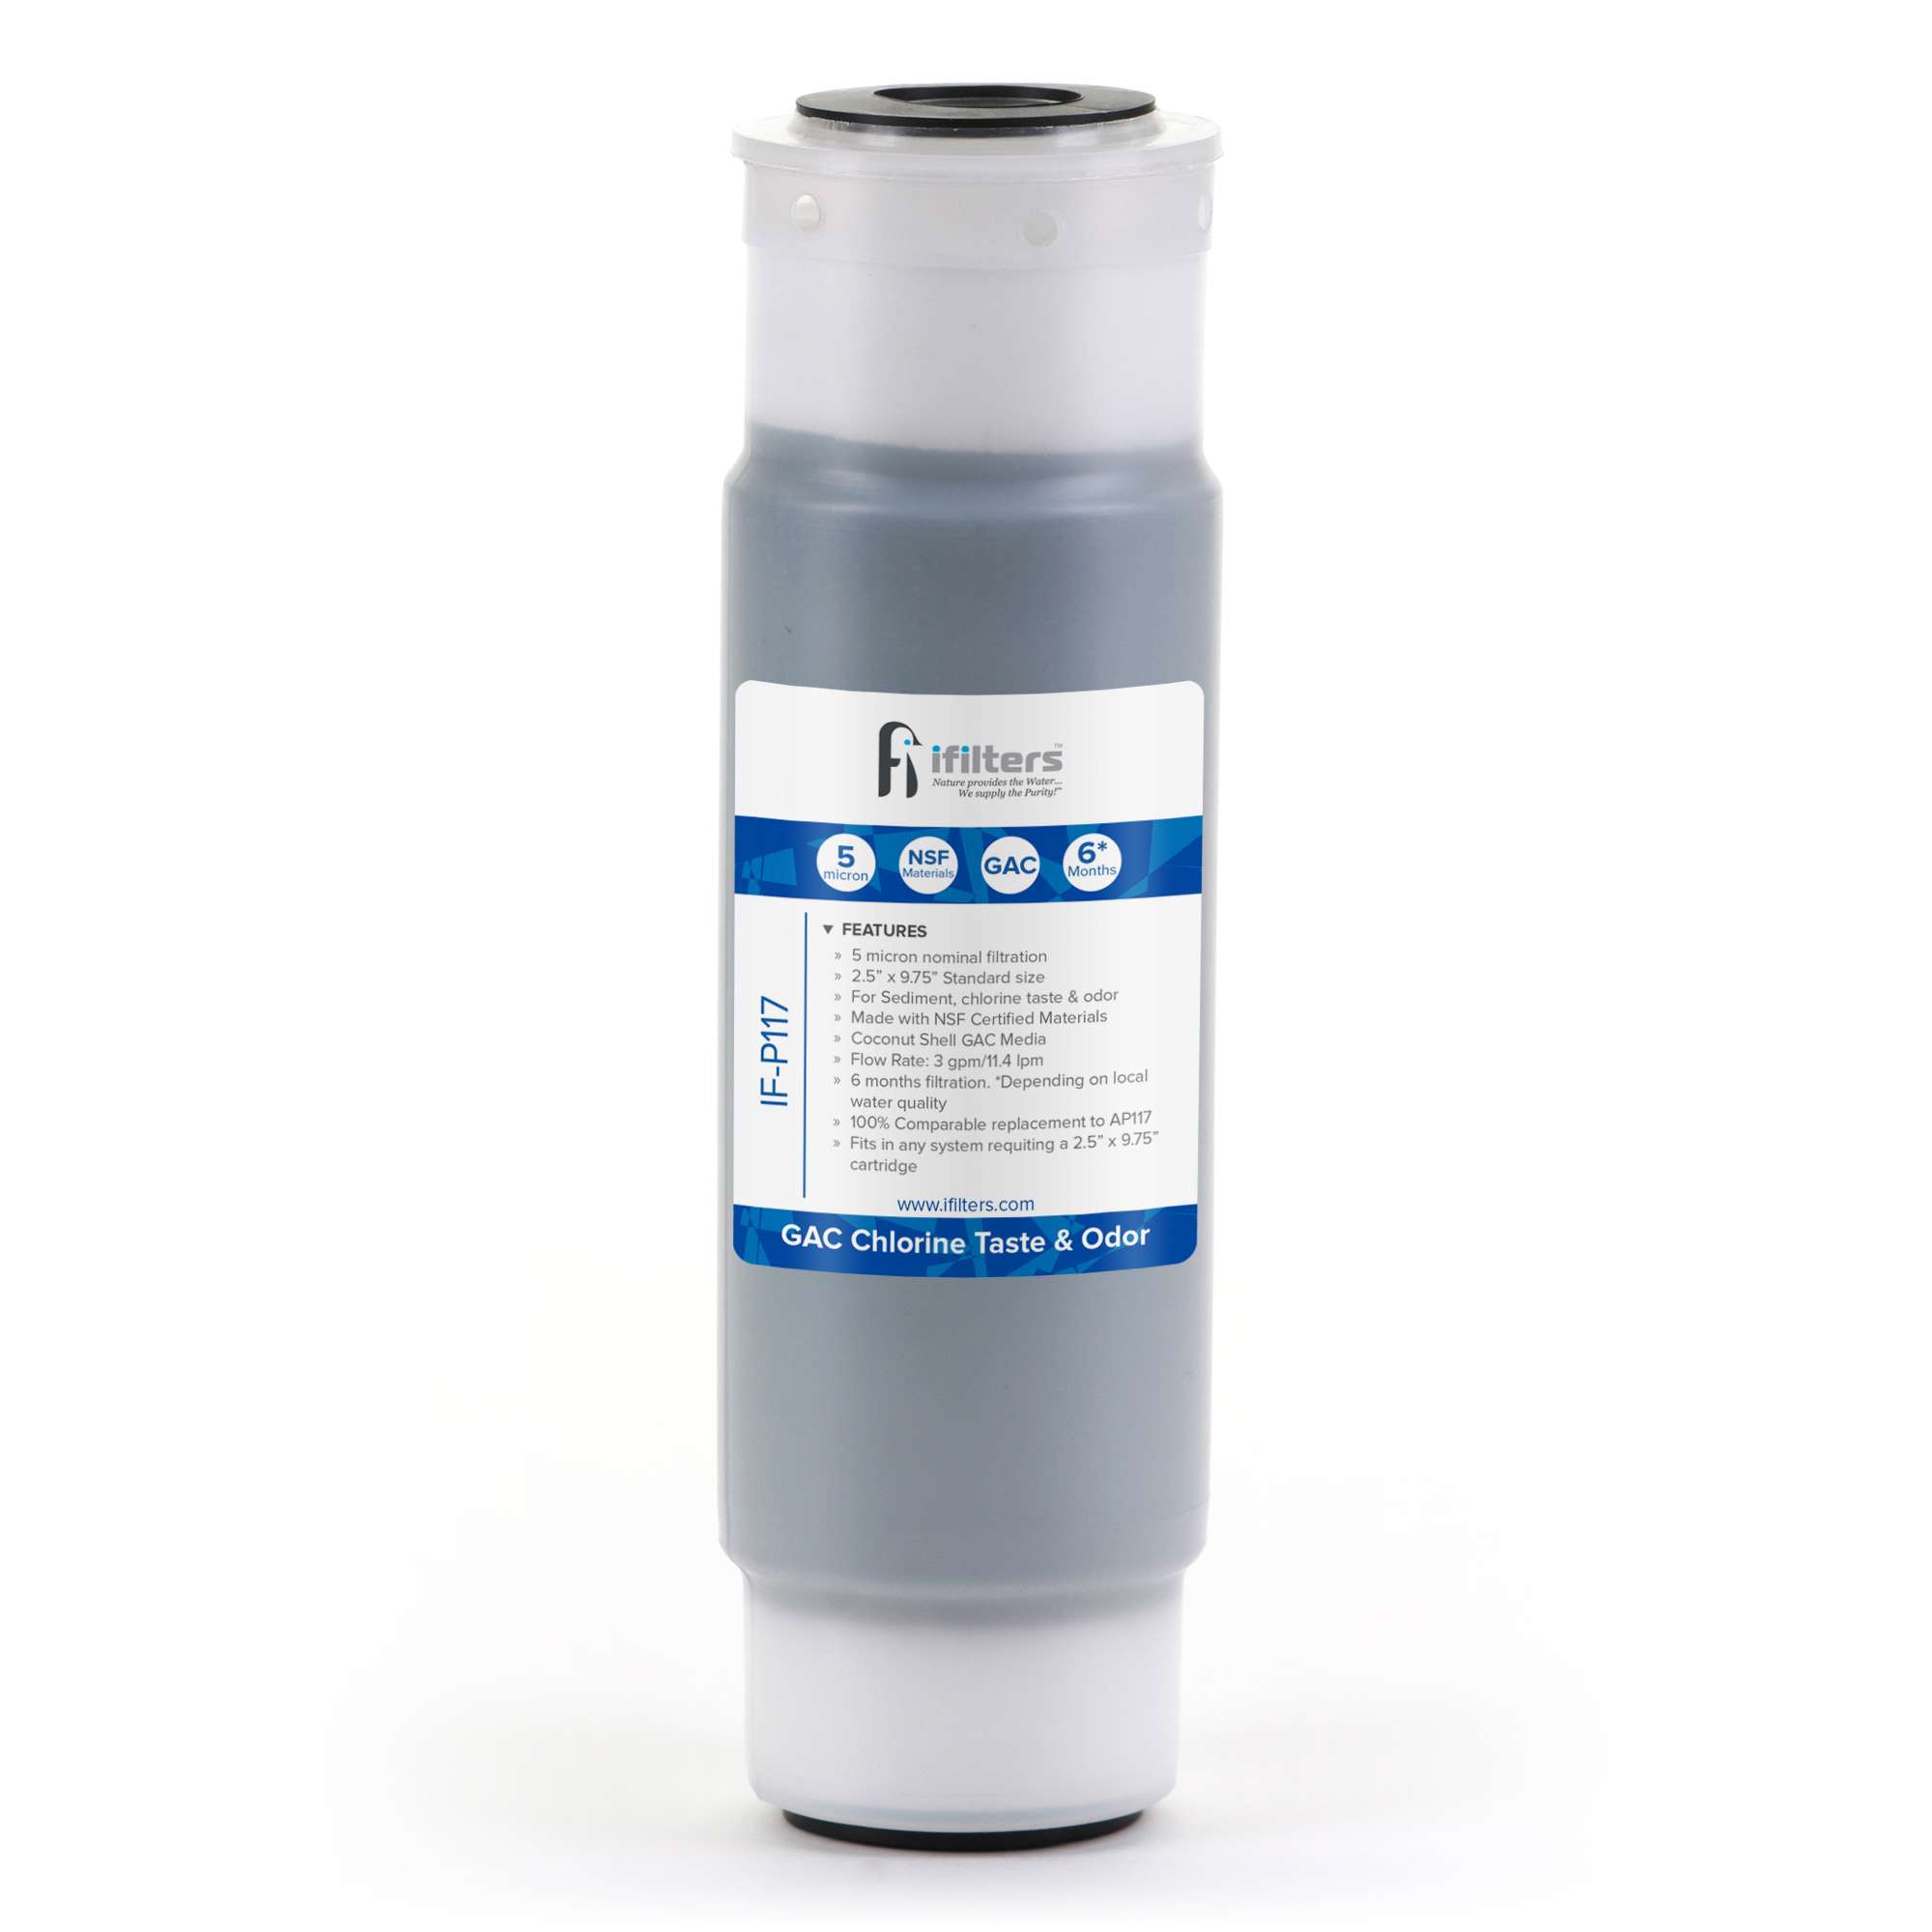 iFilters IF-P117 GAC Water Filter Whole House - 2.5" x 10" - Interchangeable with AP117 Model